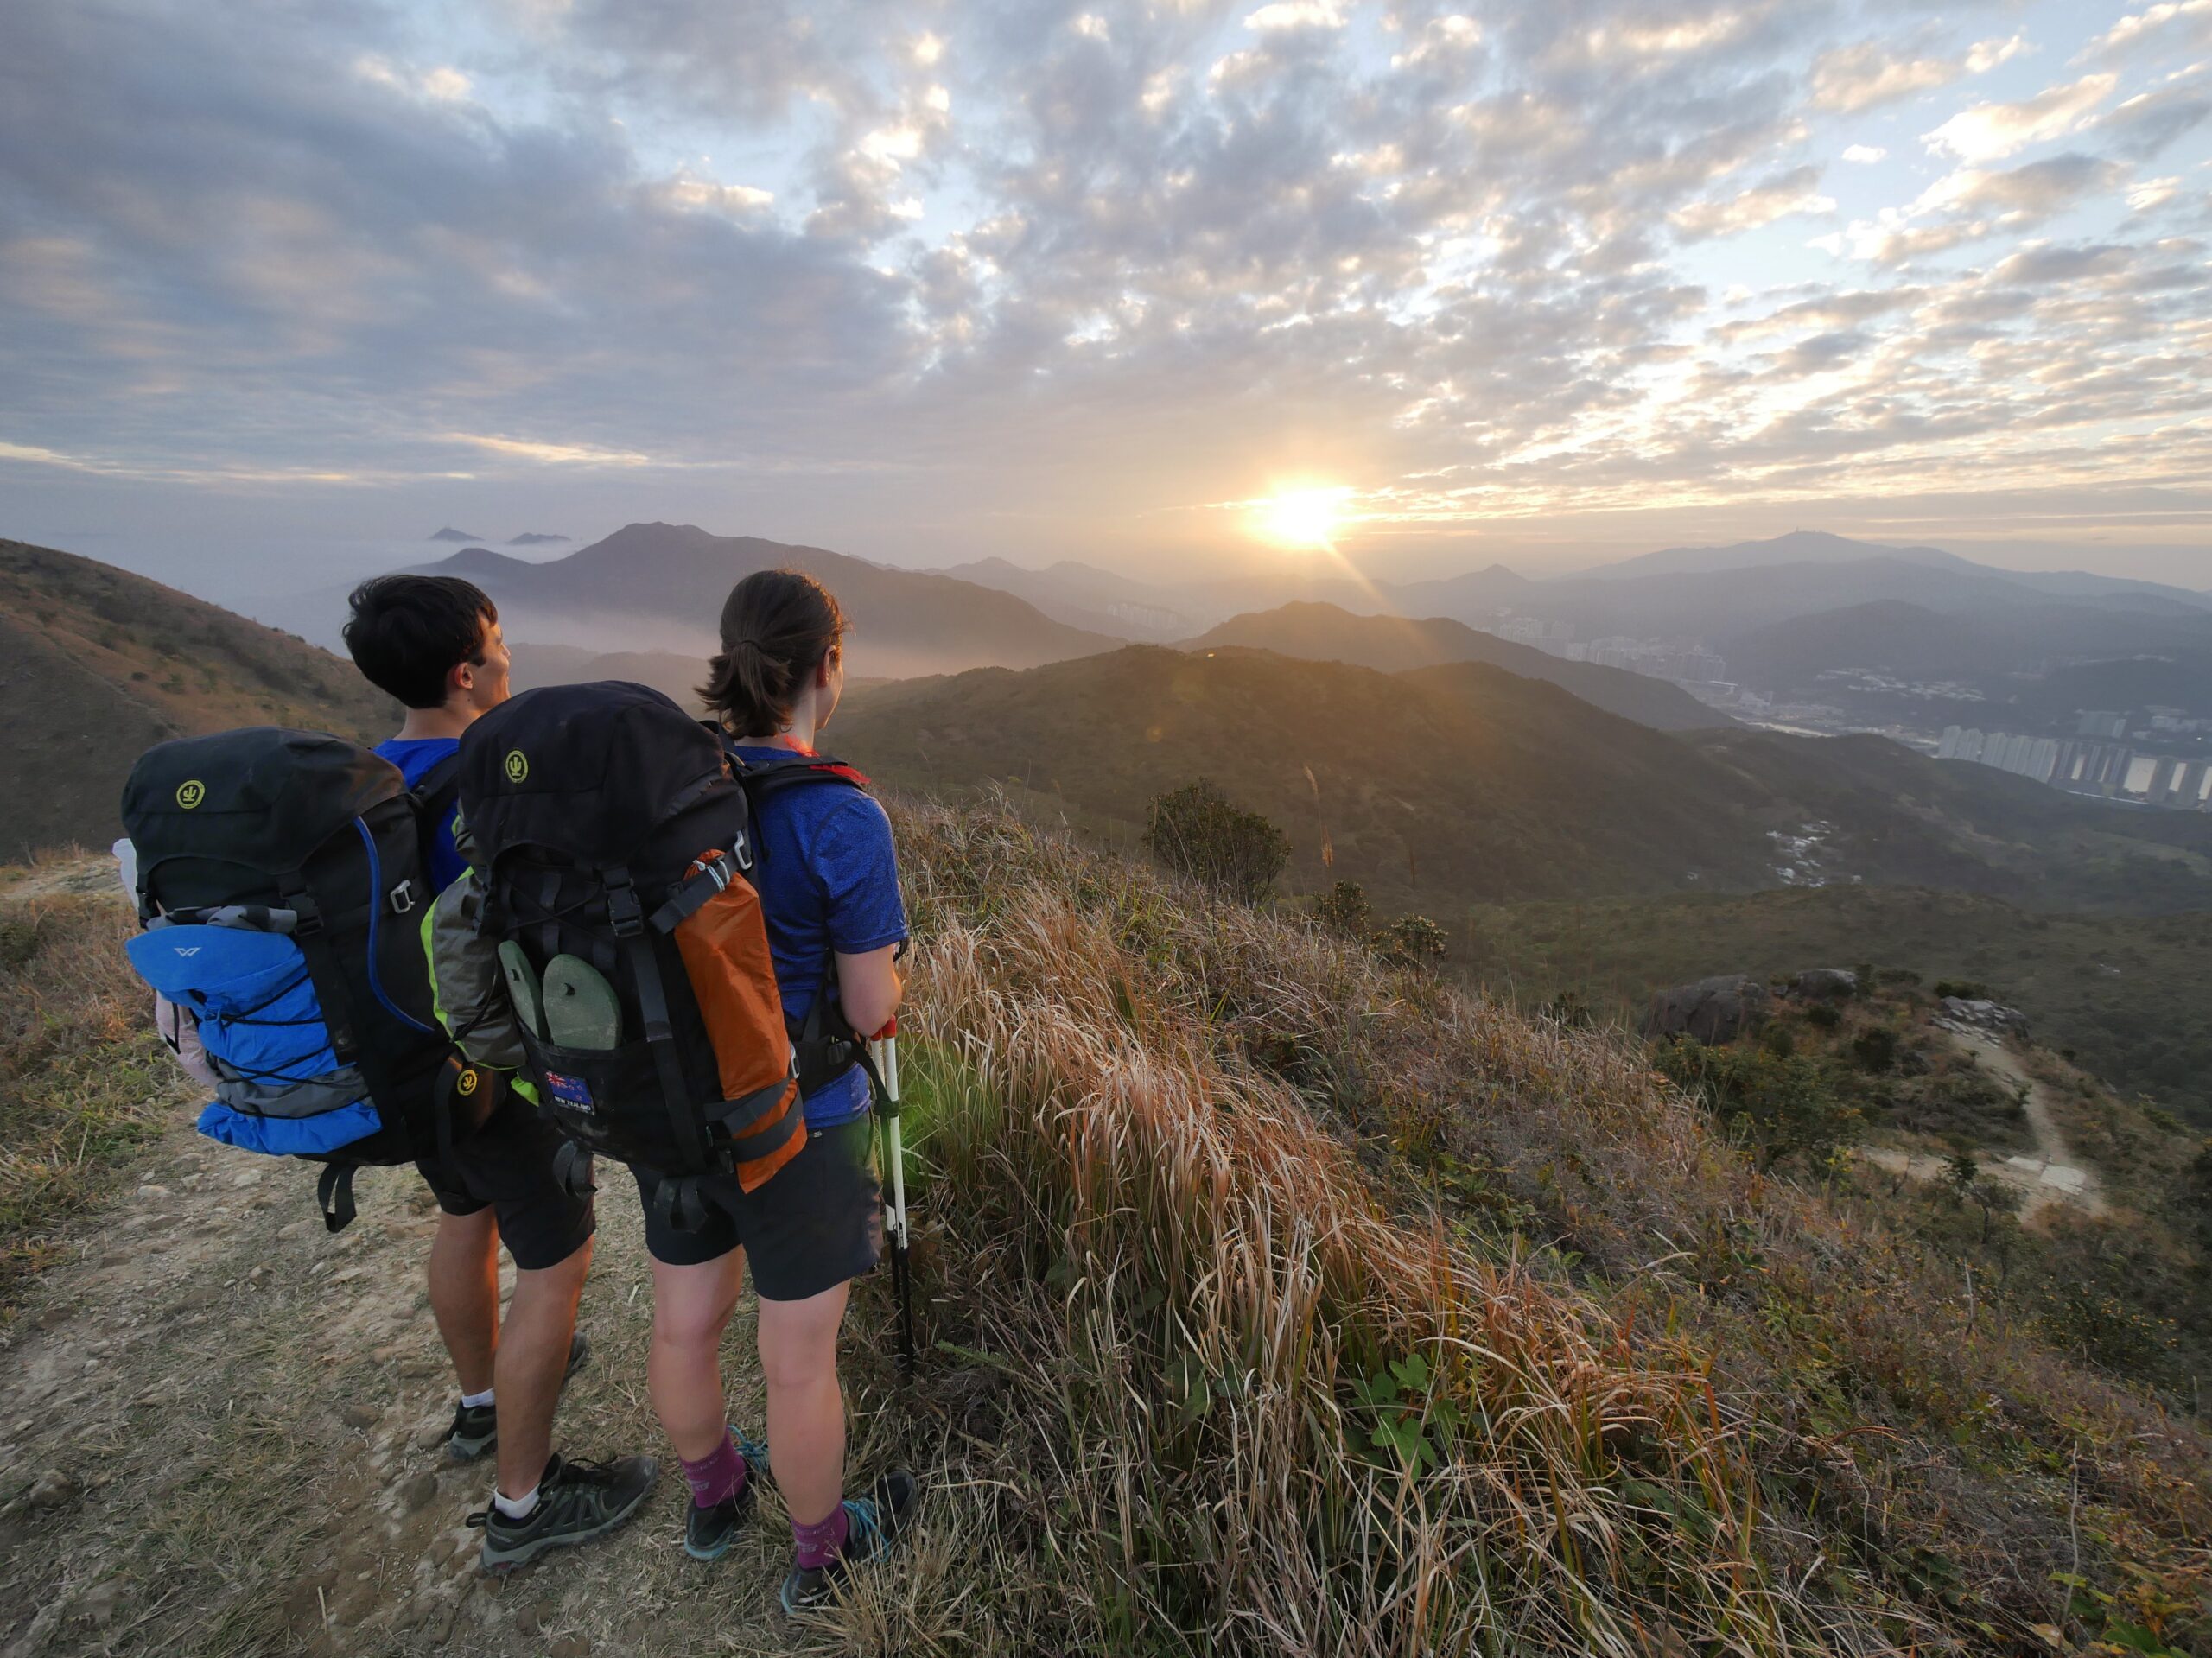 Hikers watch a sunset on the Maclehose Trail